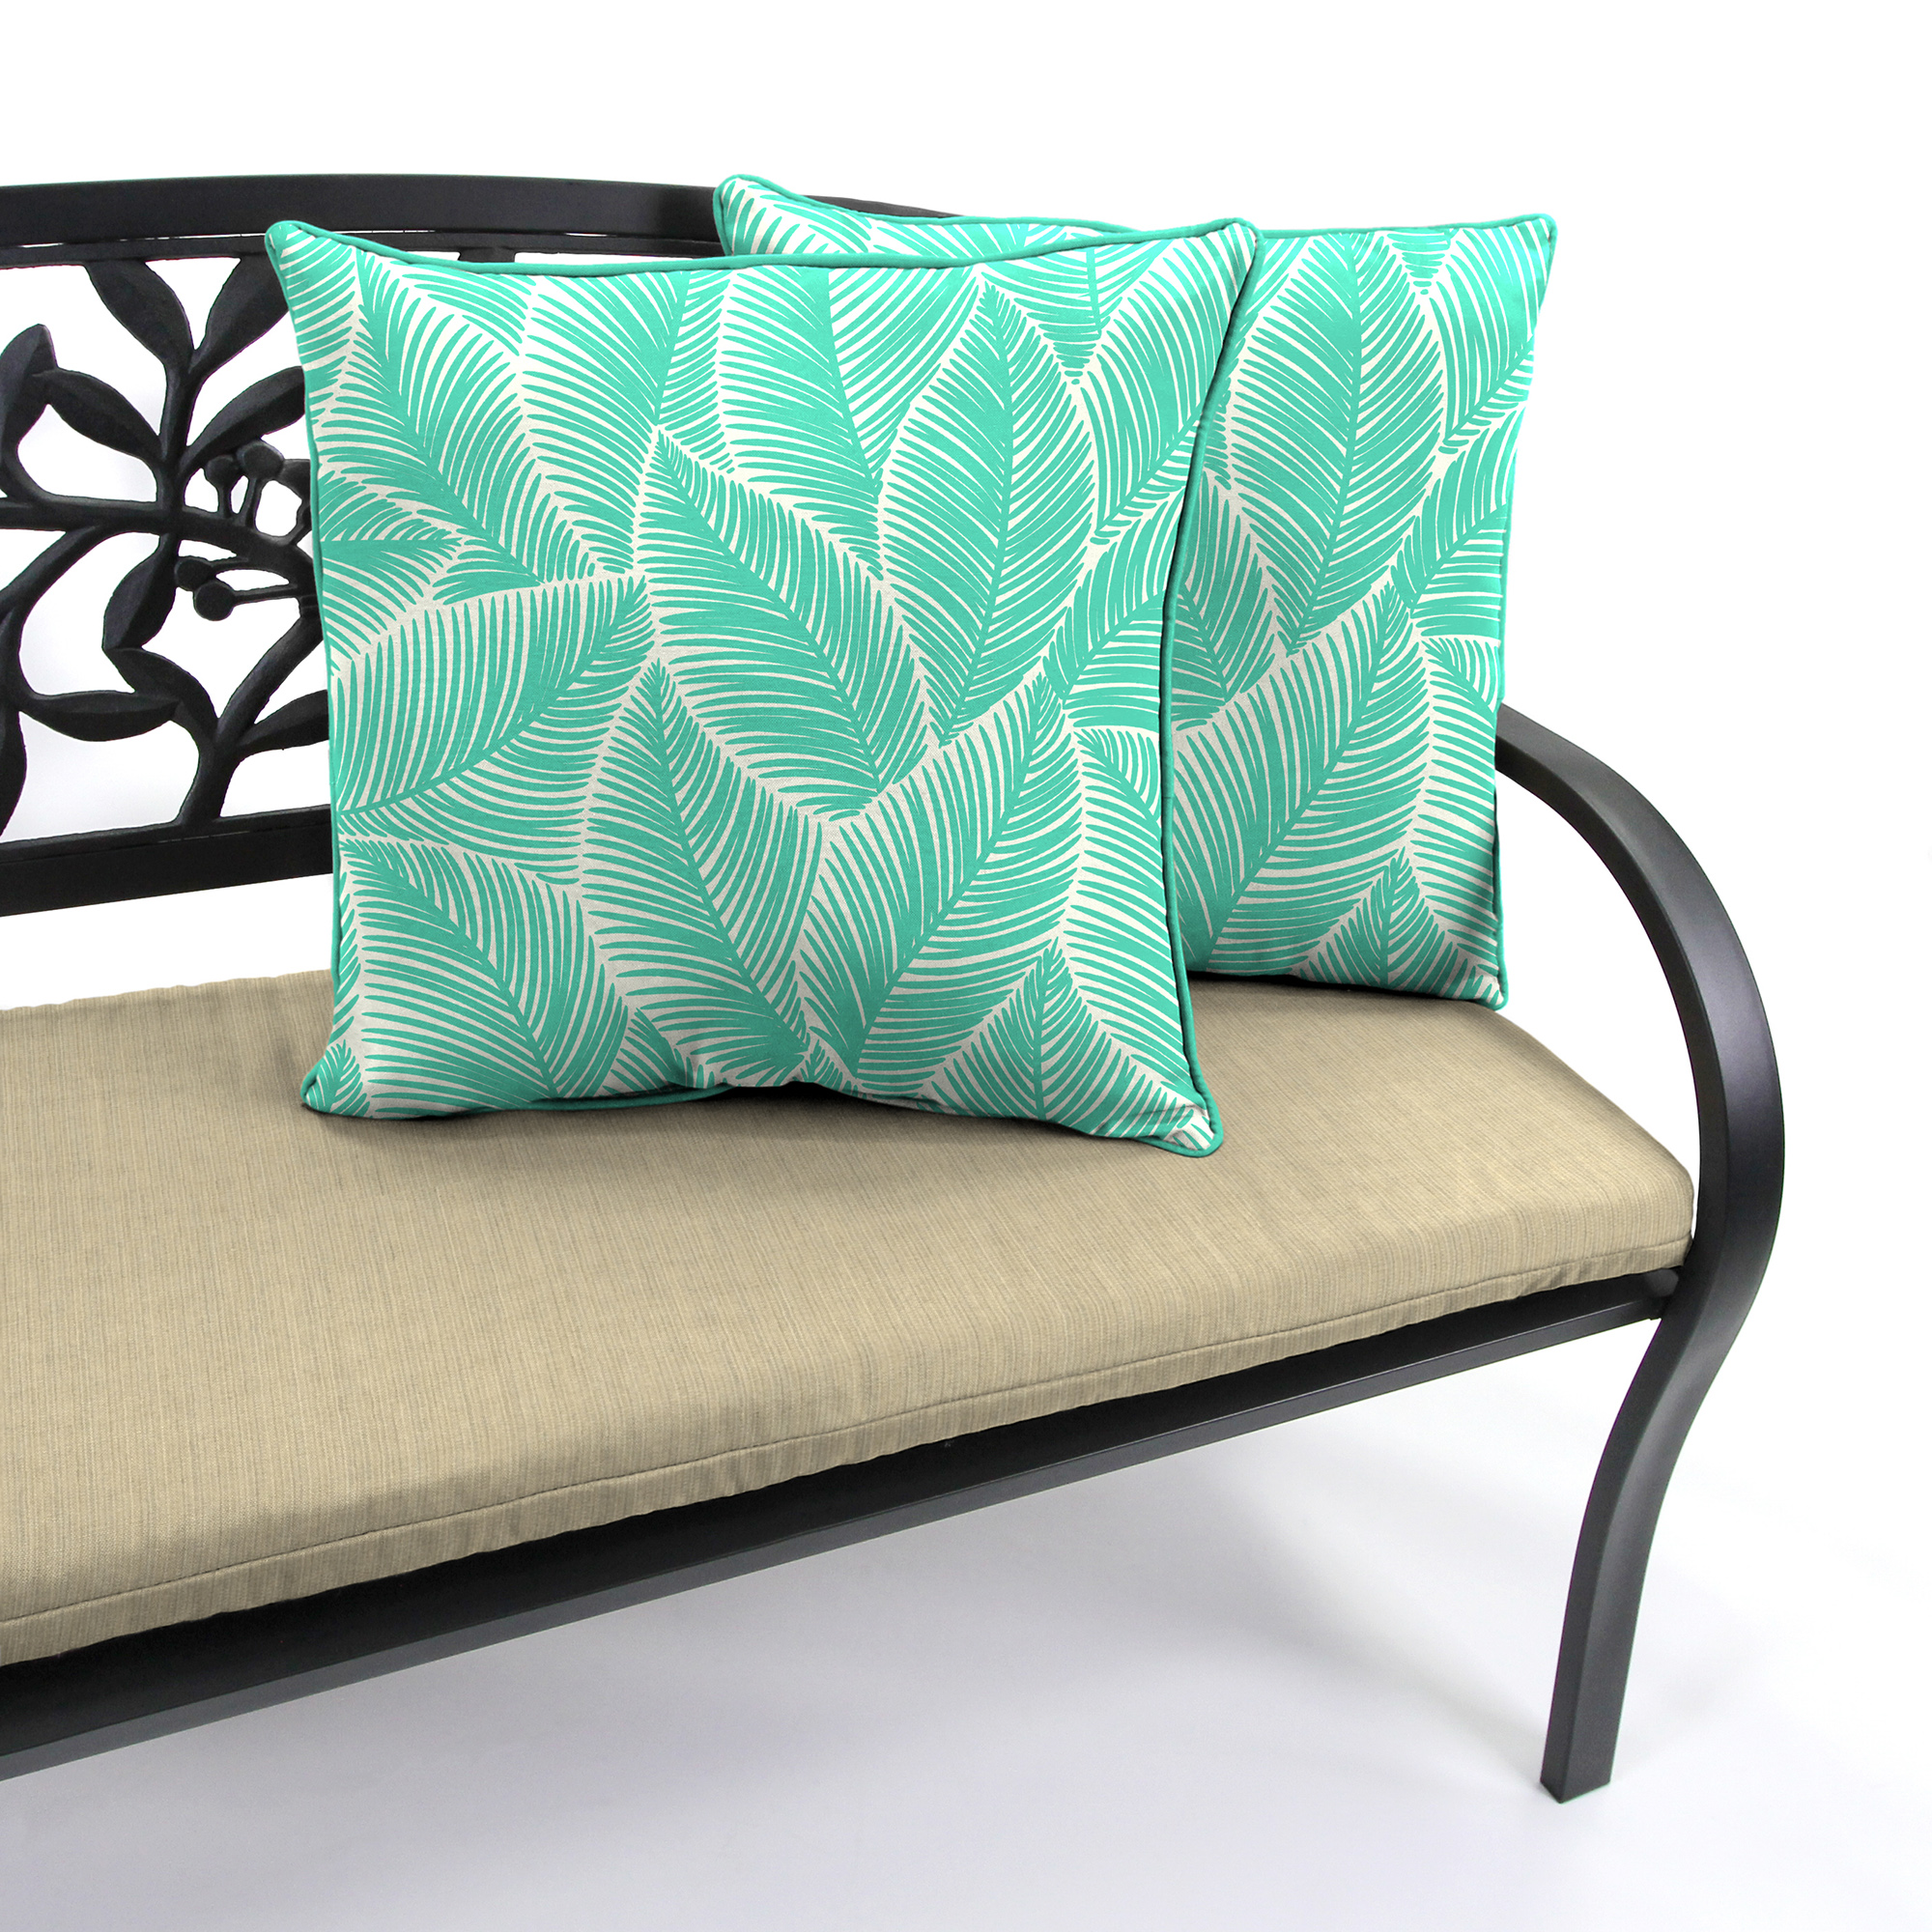 Mainstays Outdoor Throw Pillow, 16", Turquoise Palm Leaves - image 3 of 8